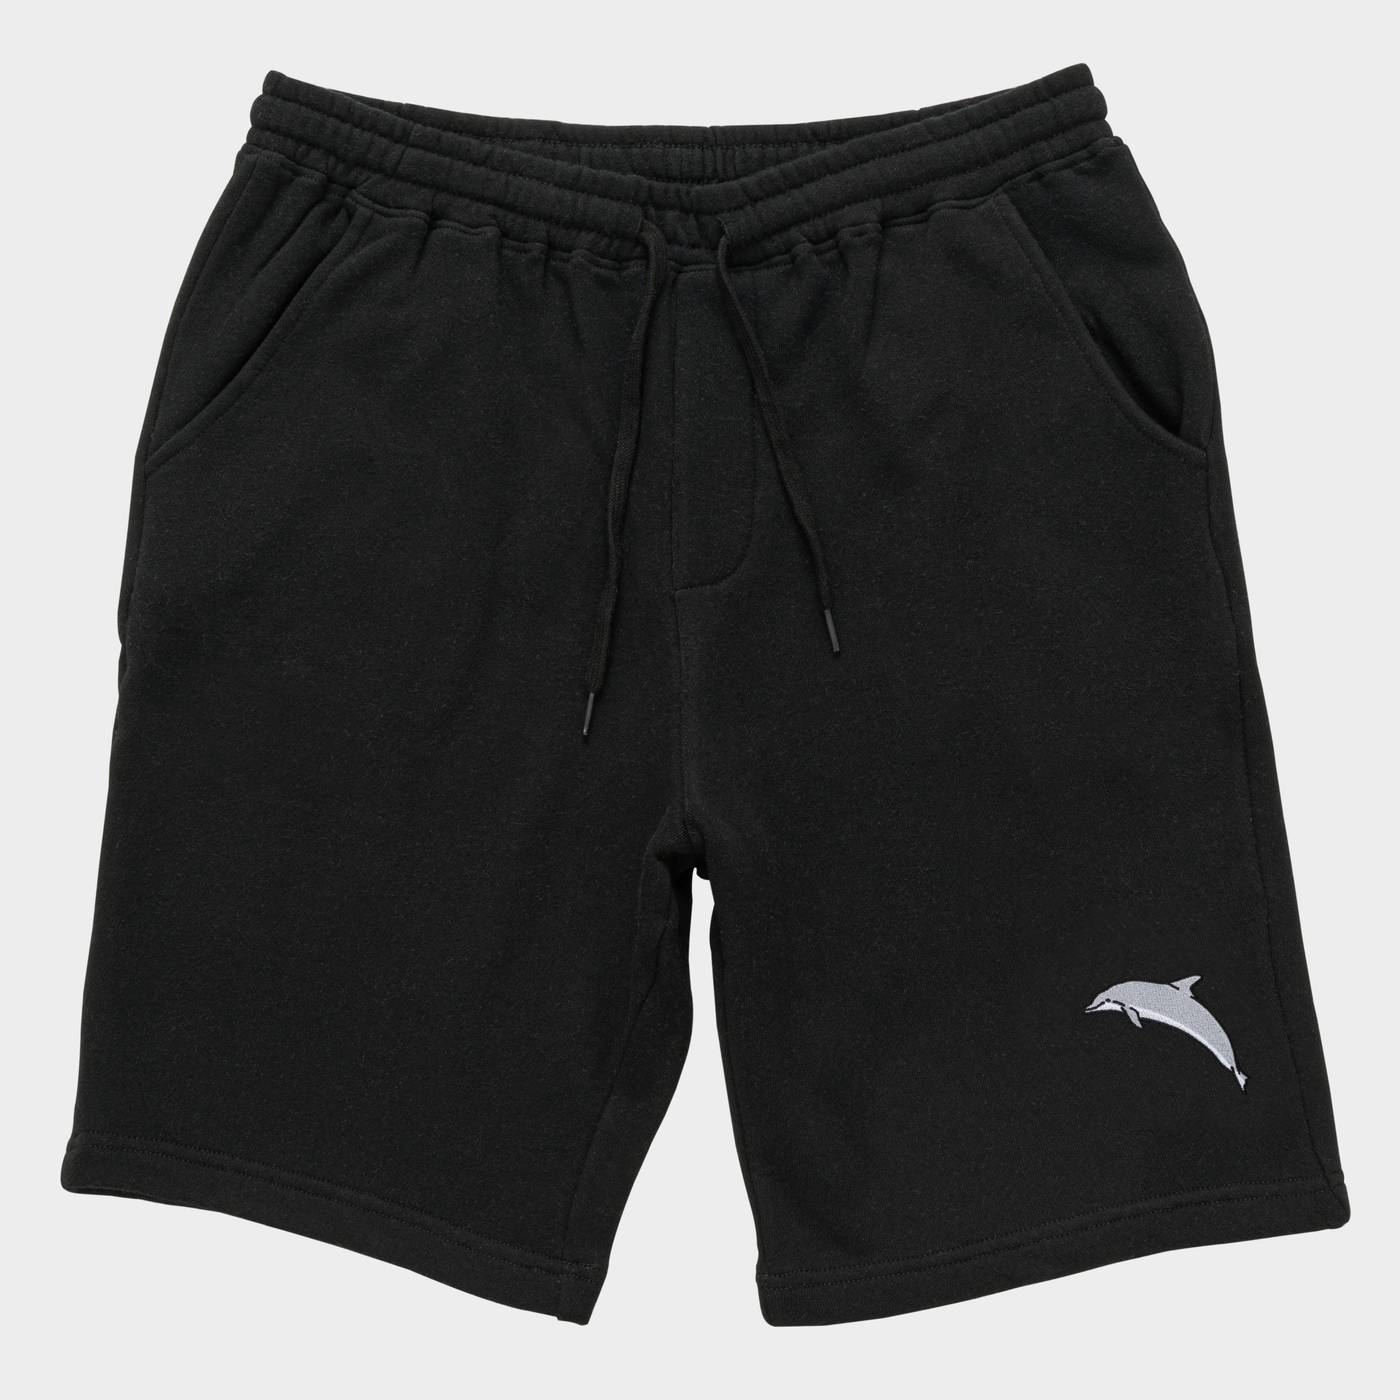 Bobby's Planet Men's Embroidered Dolphin Shorts from Seven Seas Fish Animals Collection in Black Color#color_black